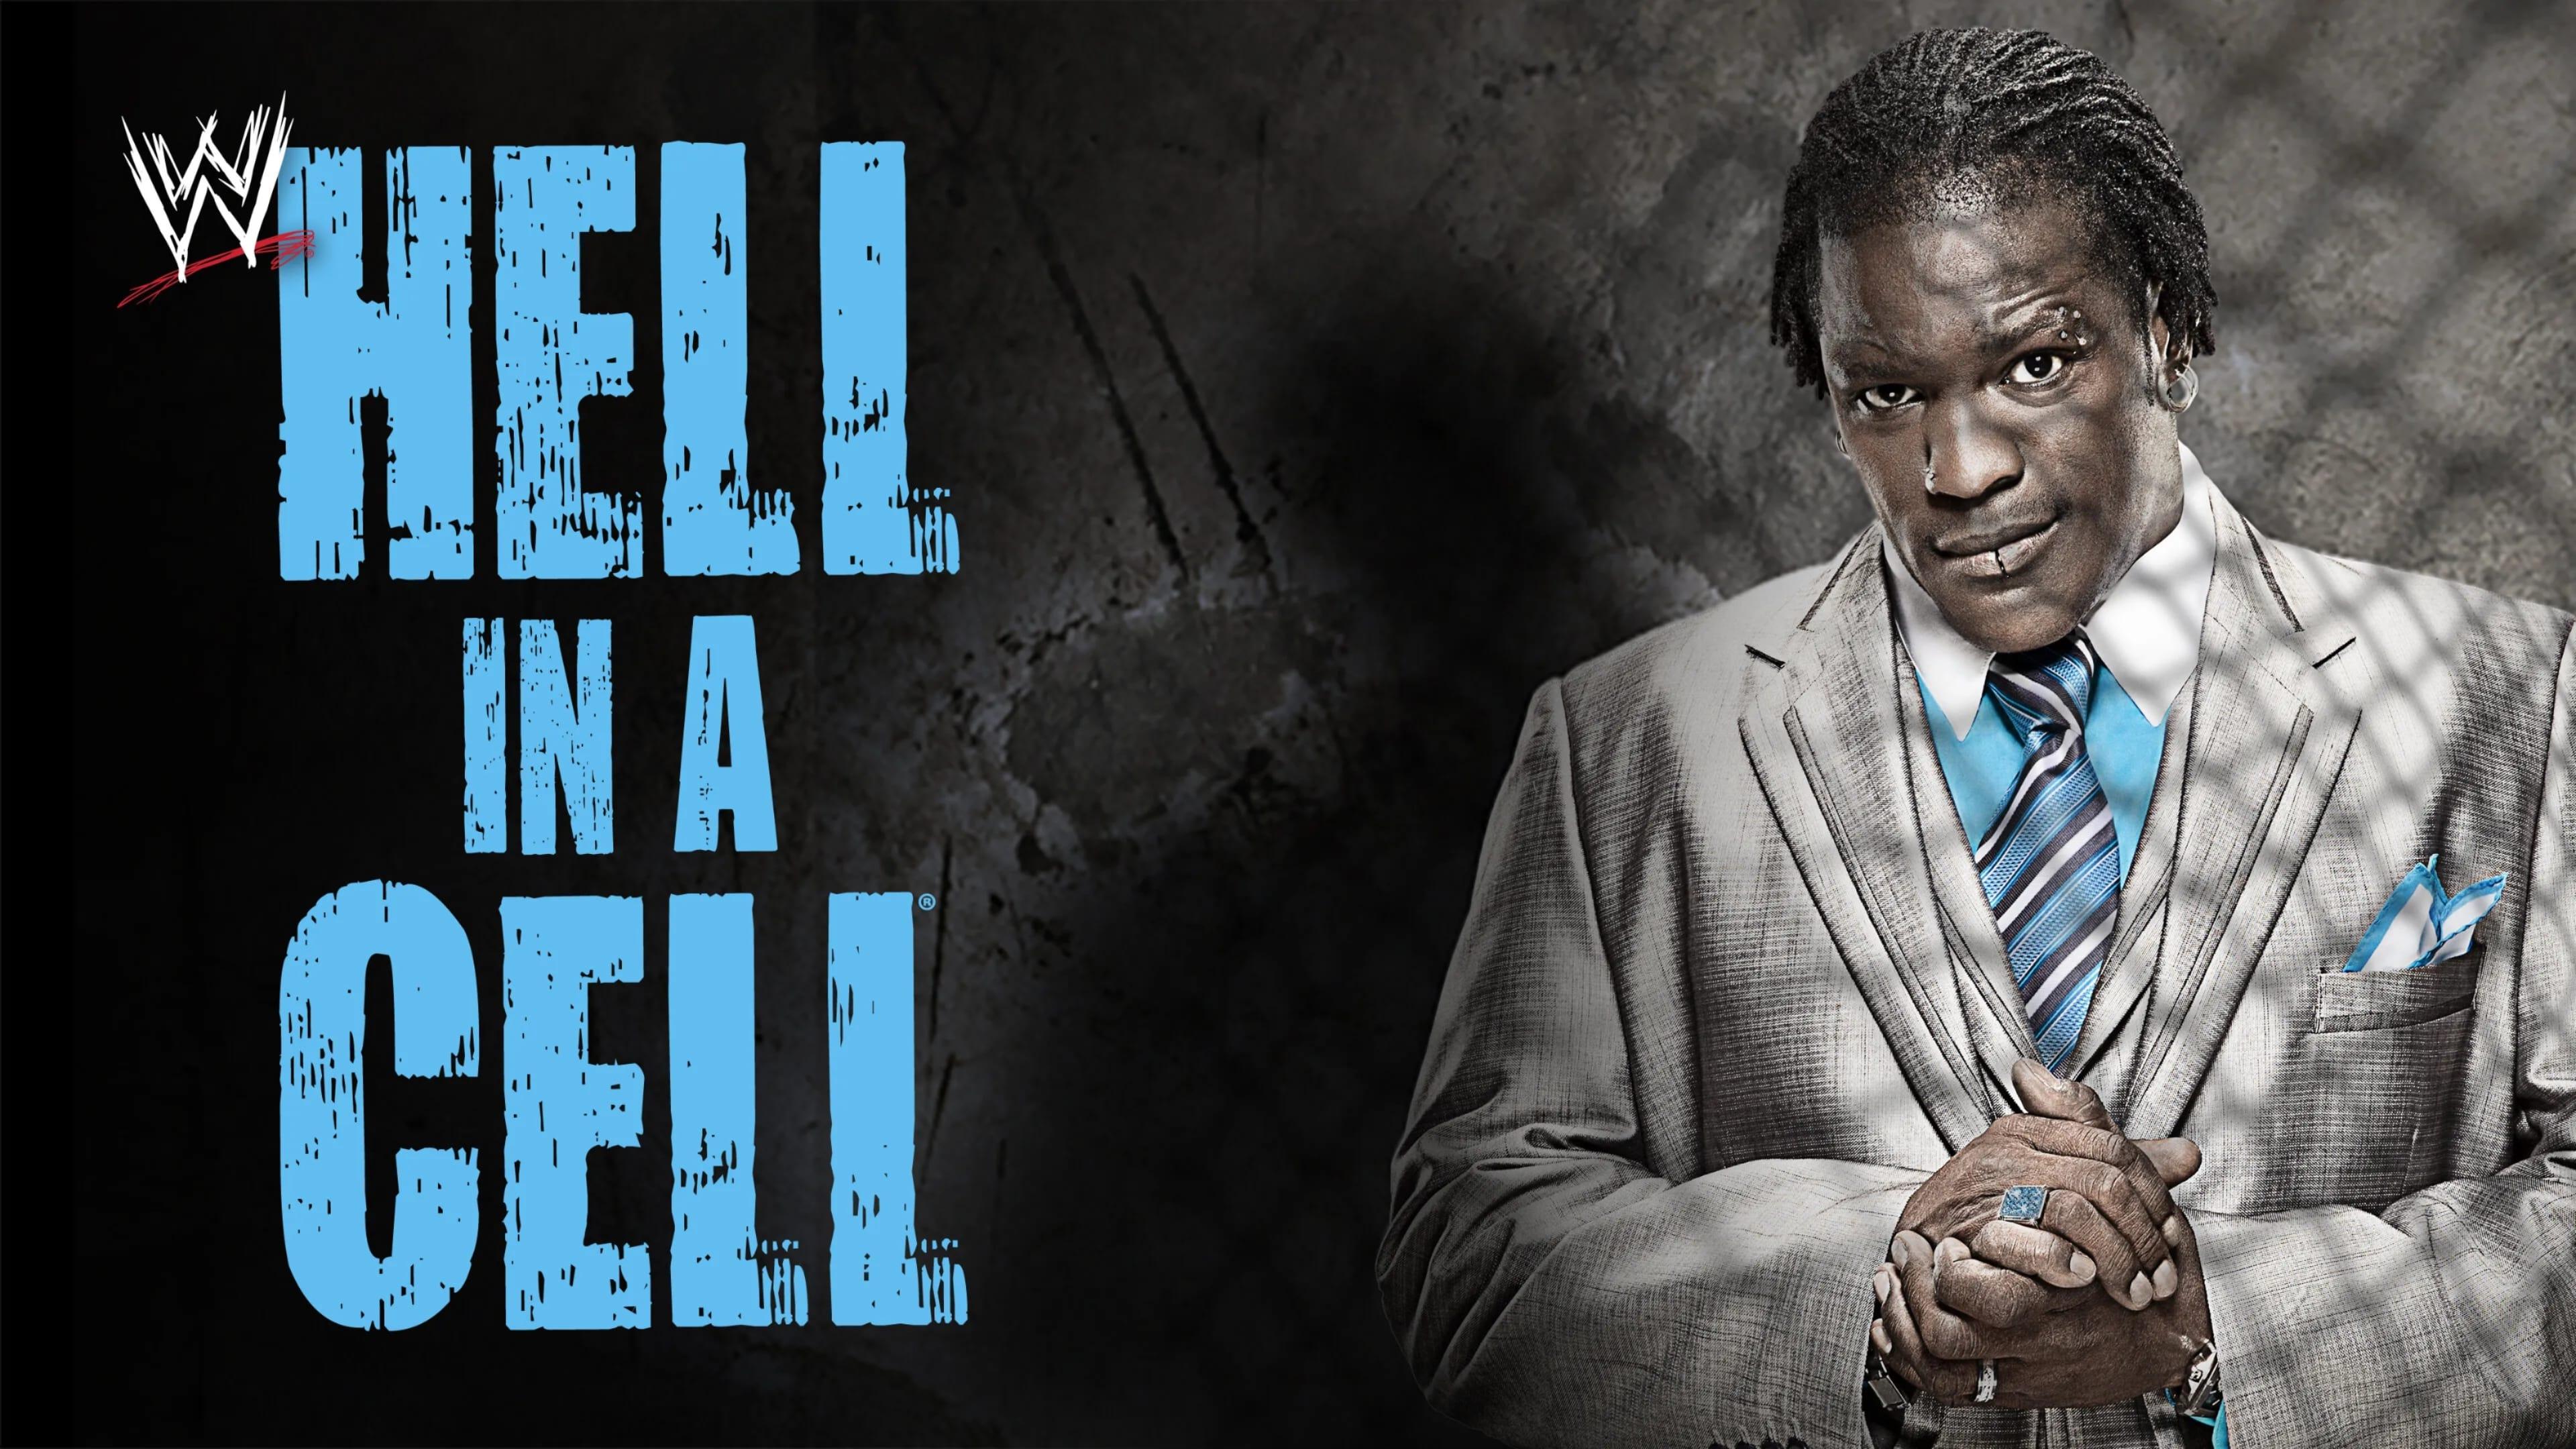 WWE Hell in a Cell 2013 backdrop